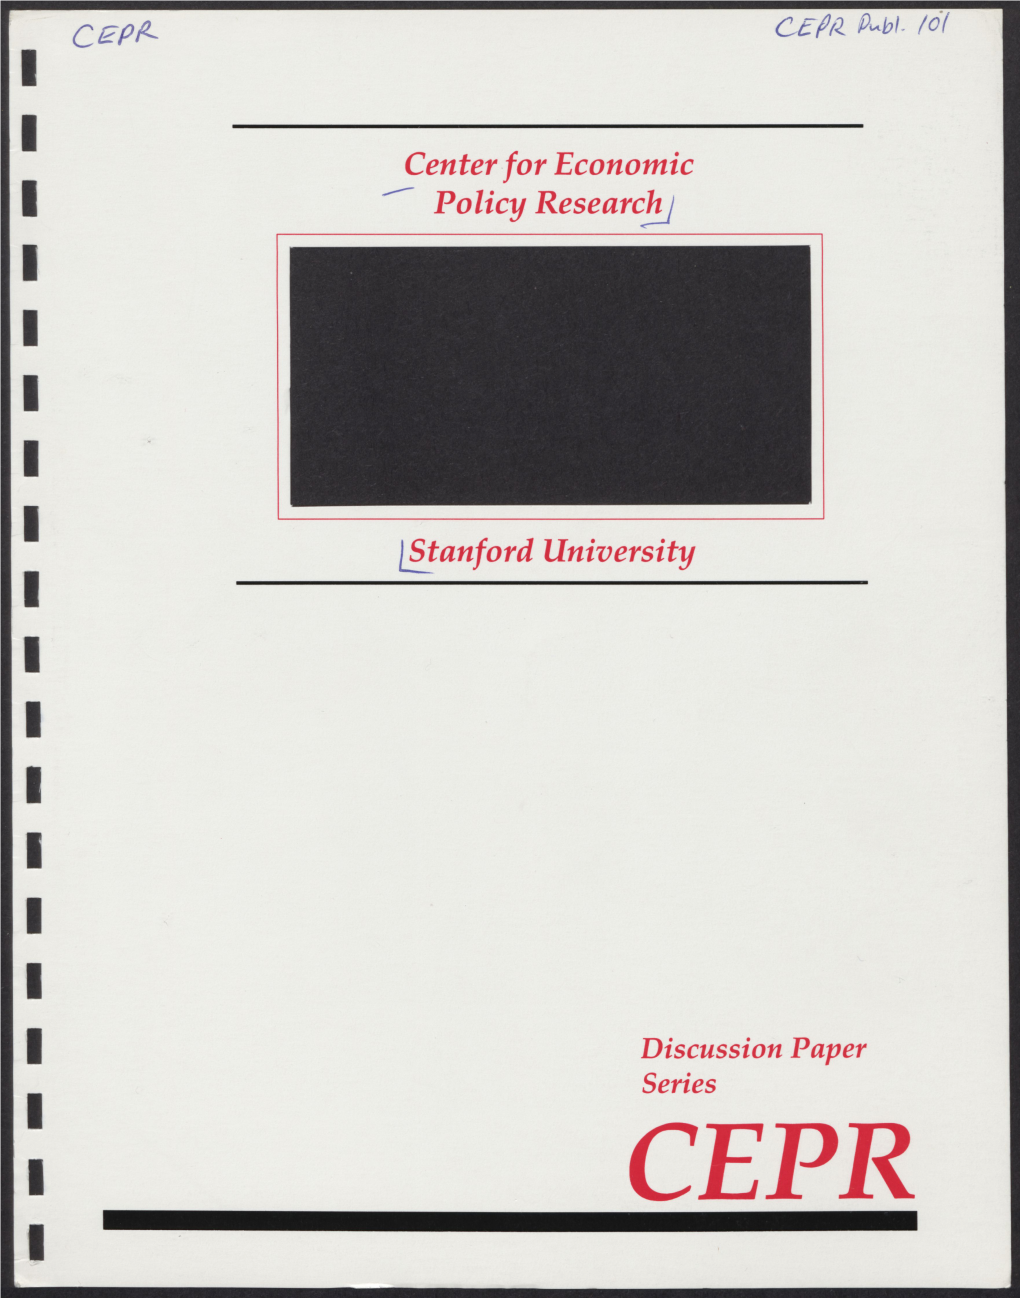 CEPA Center for Economic Policy Research" 1§Panford University